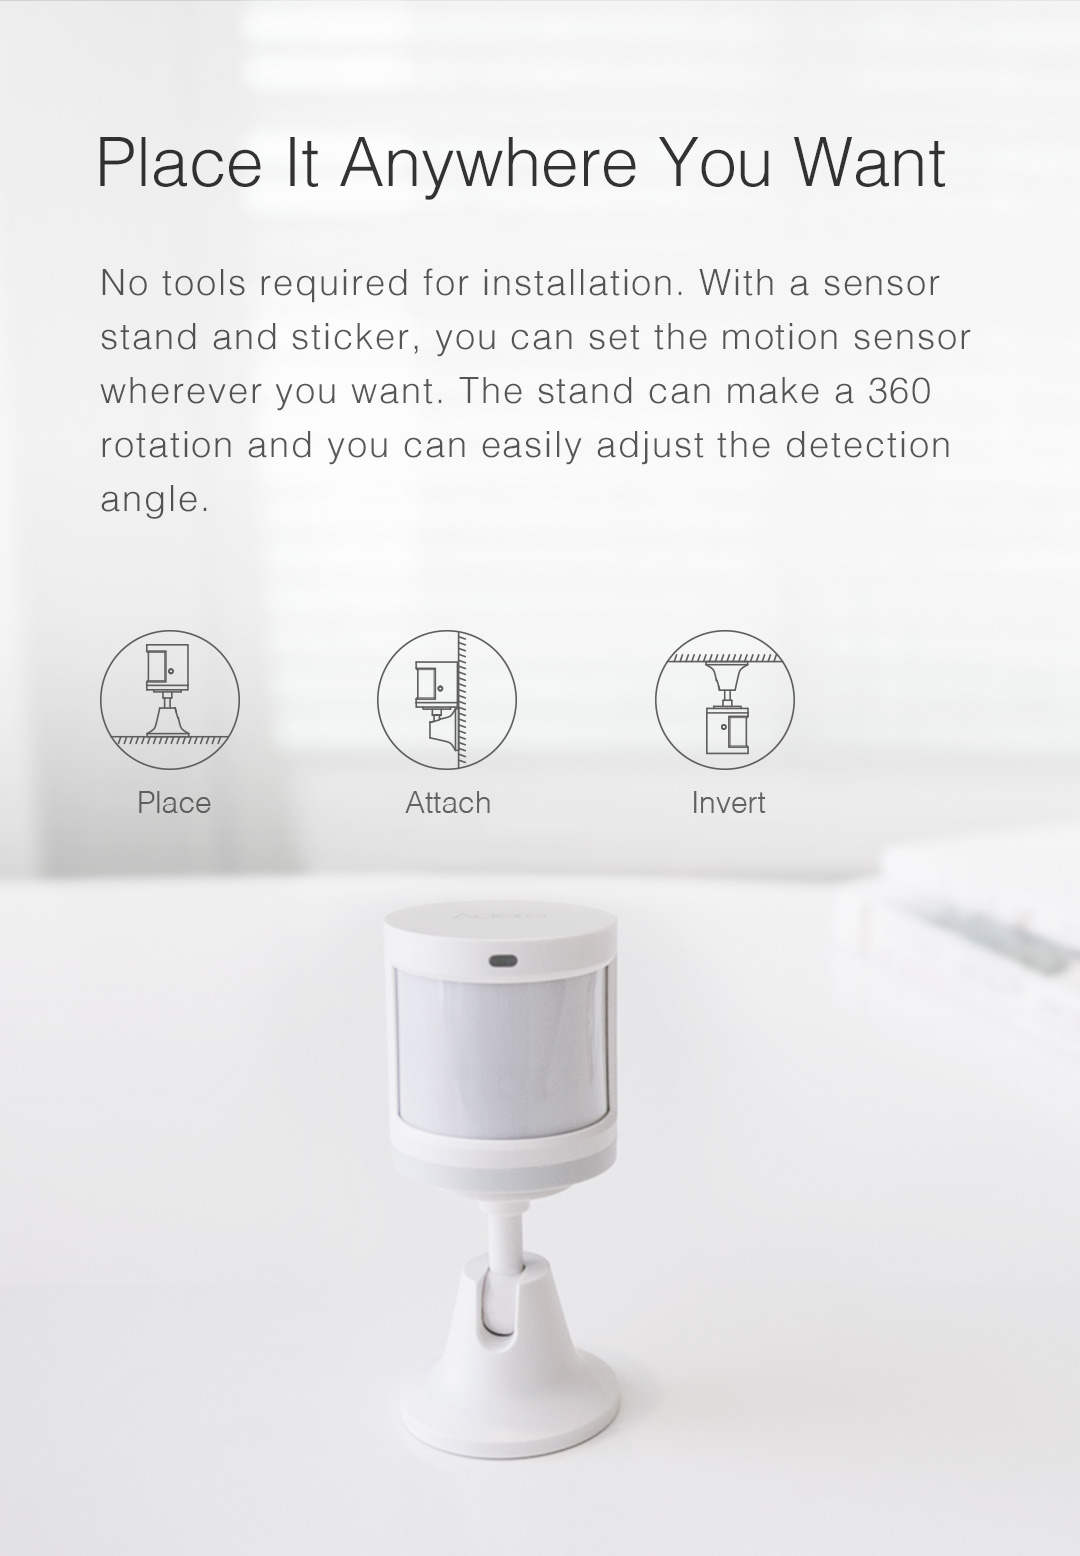 Indoor smart motion sensor with stand and sticker that you can put it anywhere